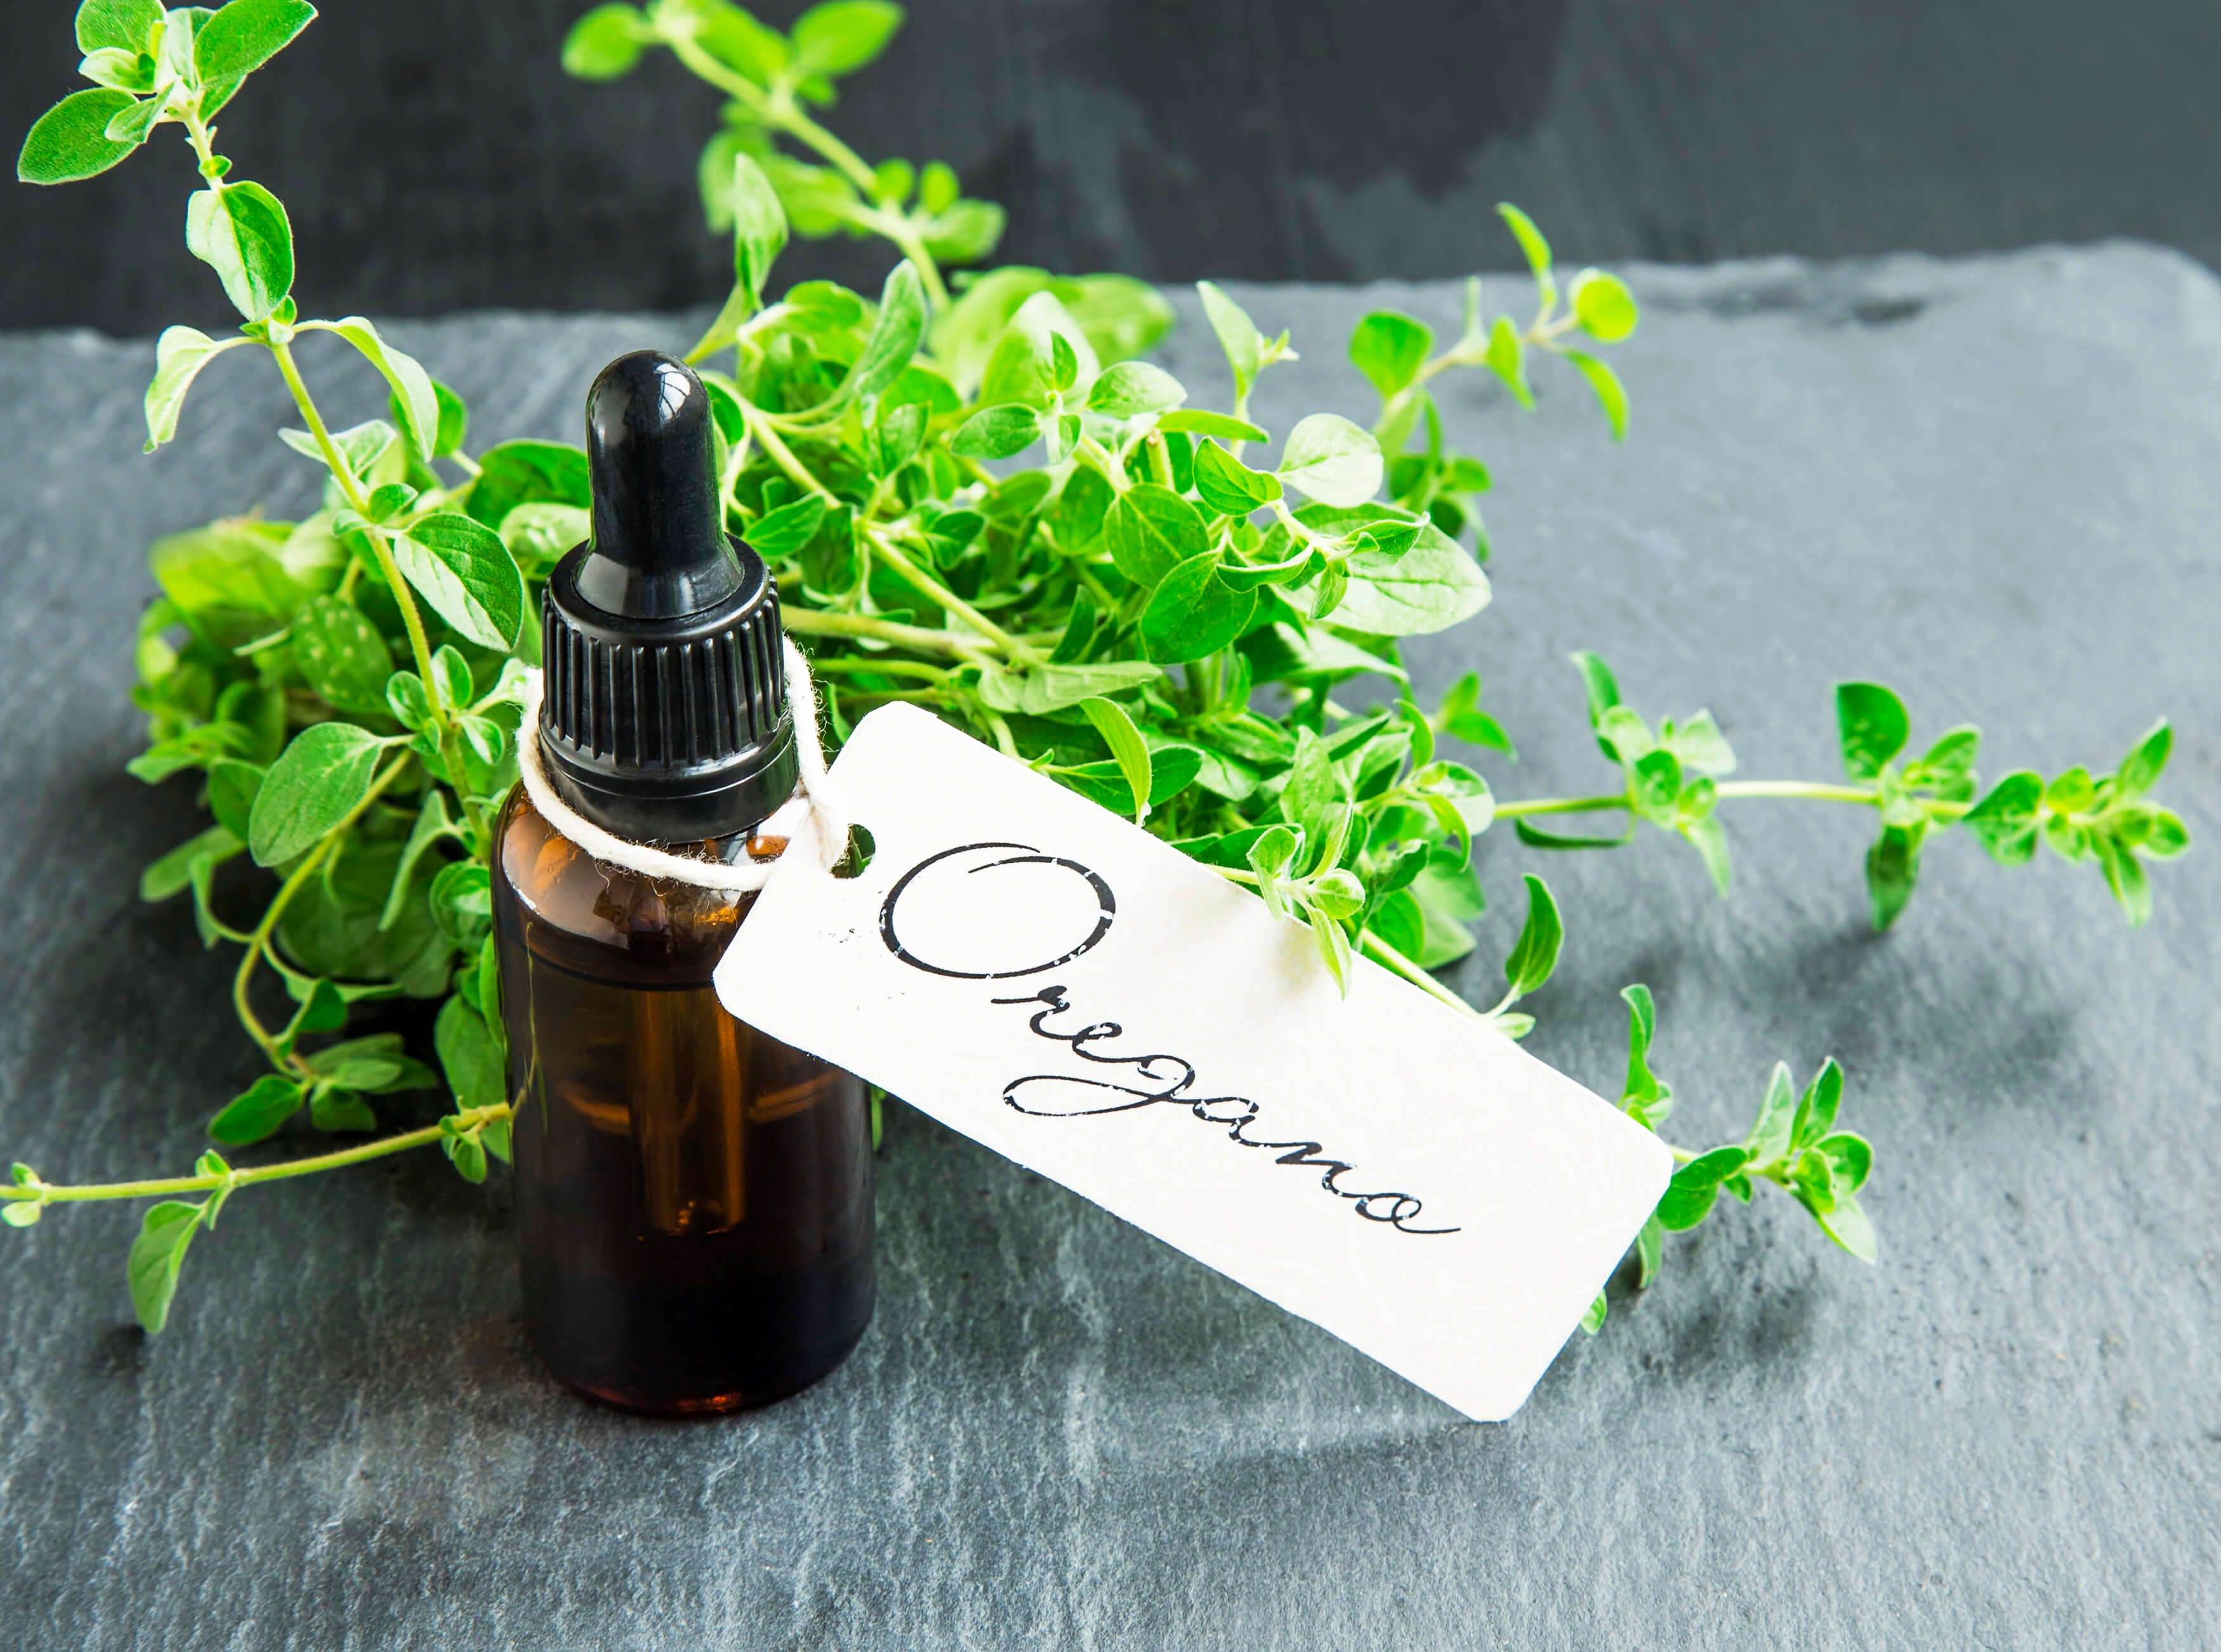 Oregano oil bottle with label and oregano herb bunch